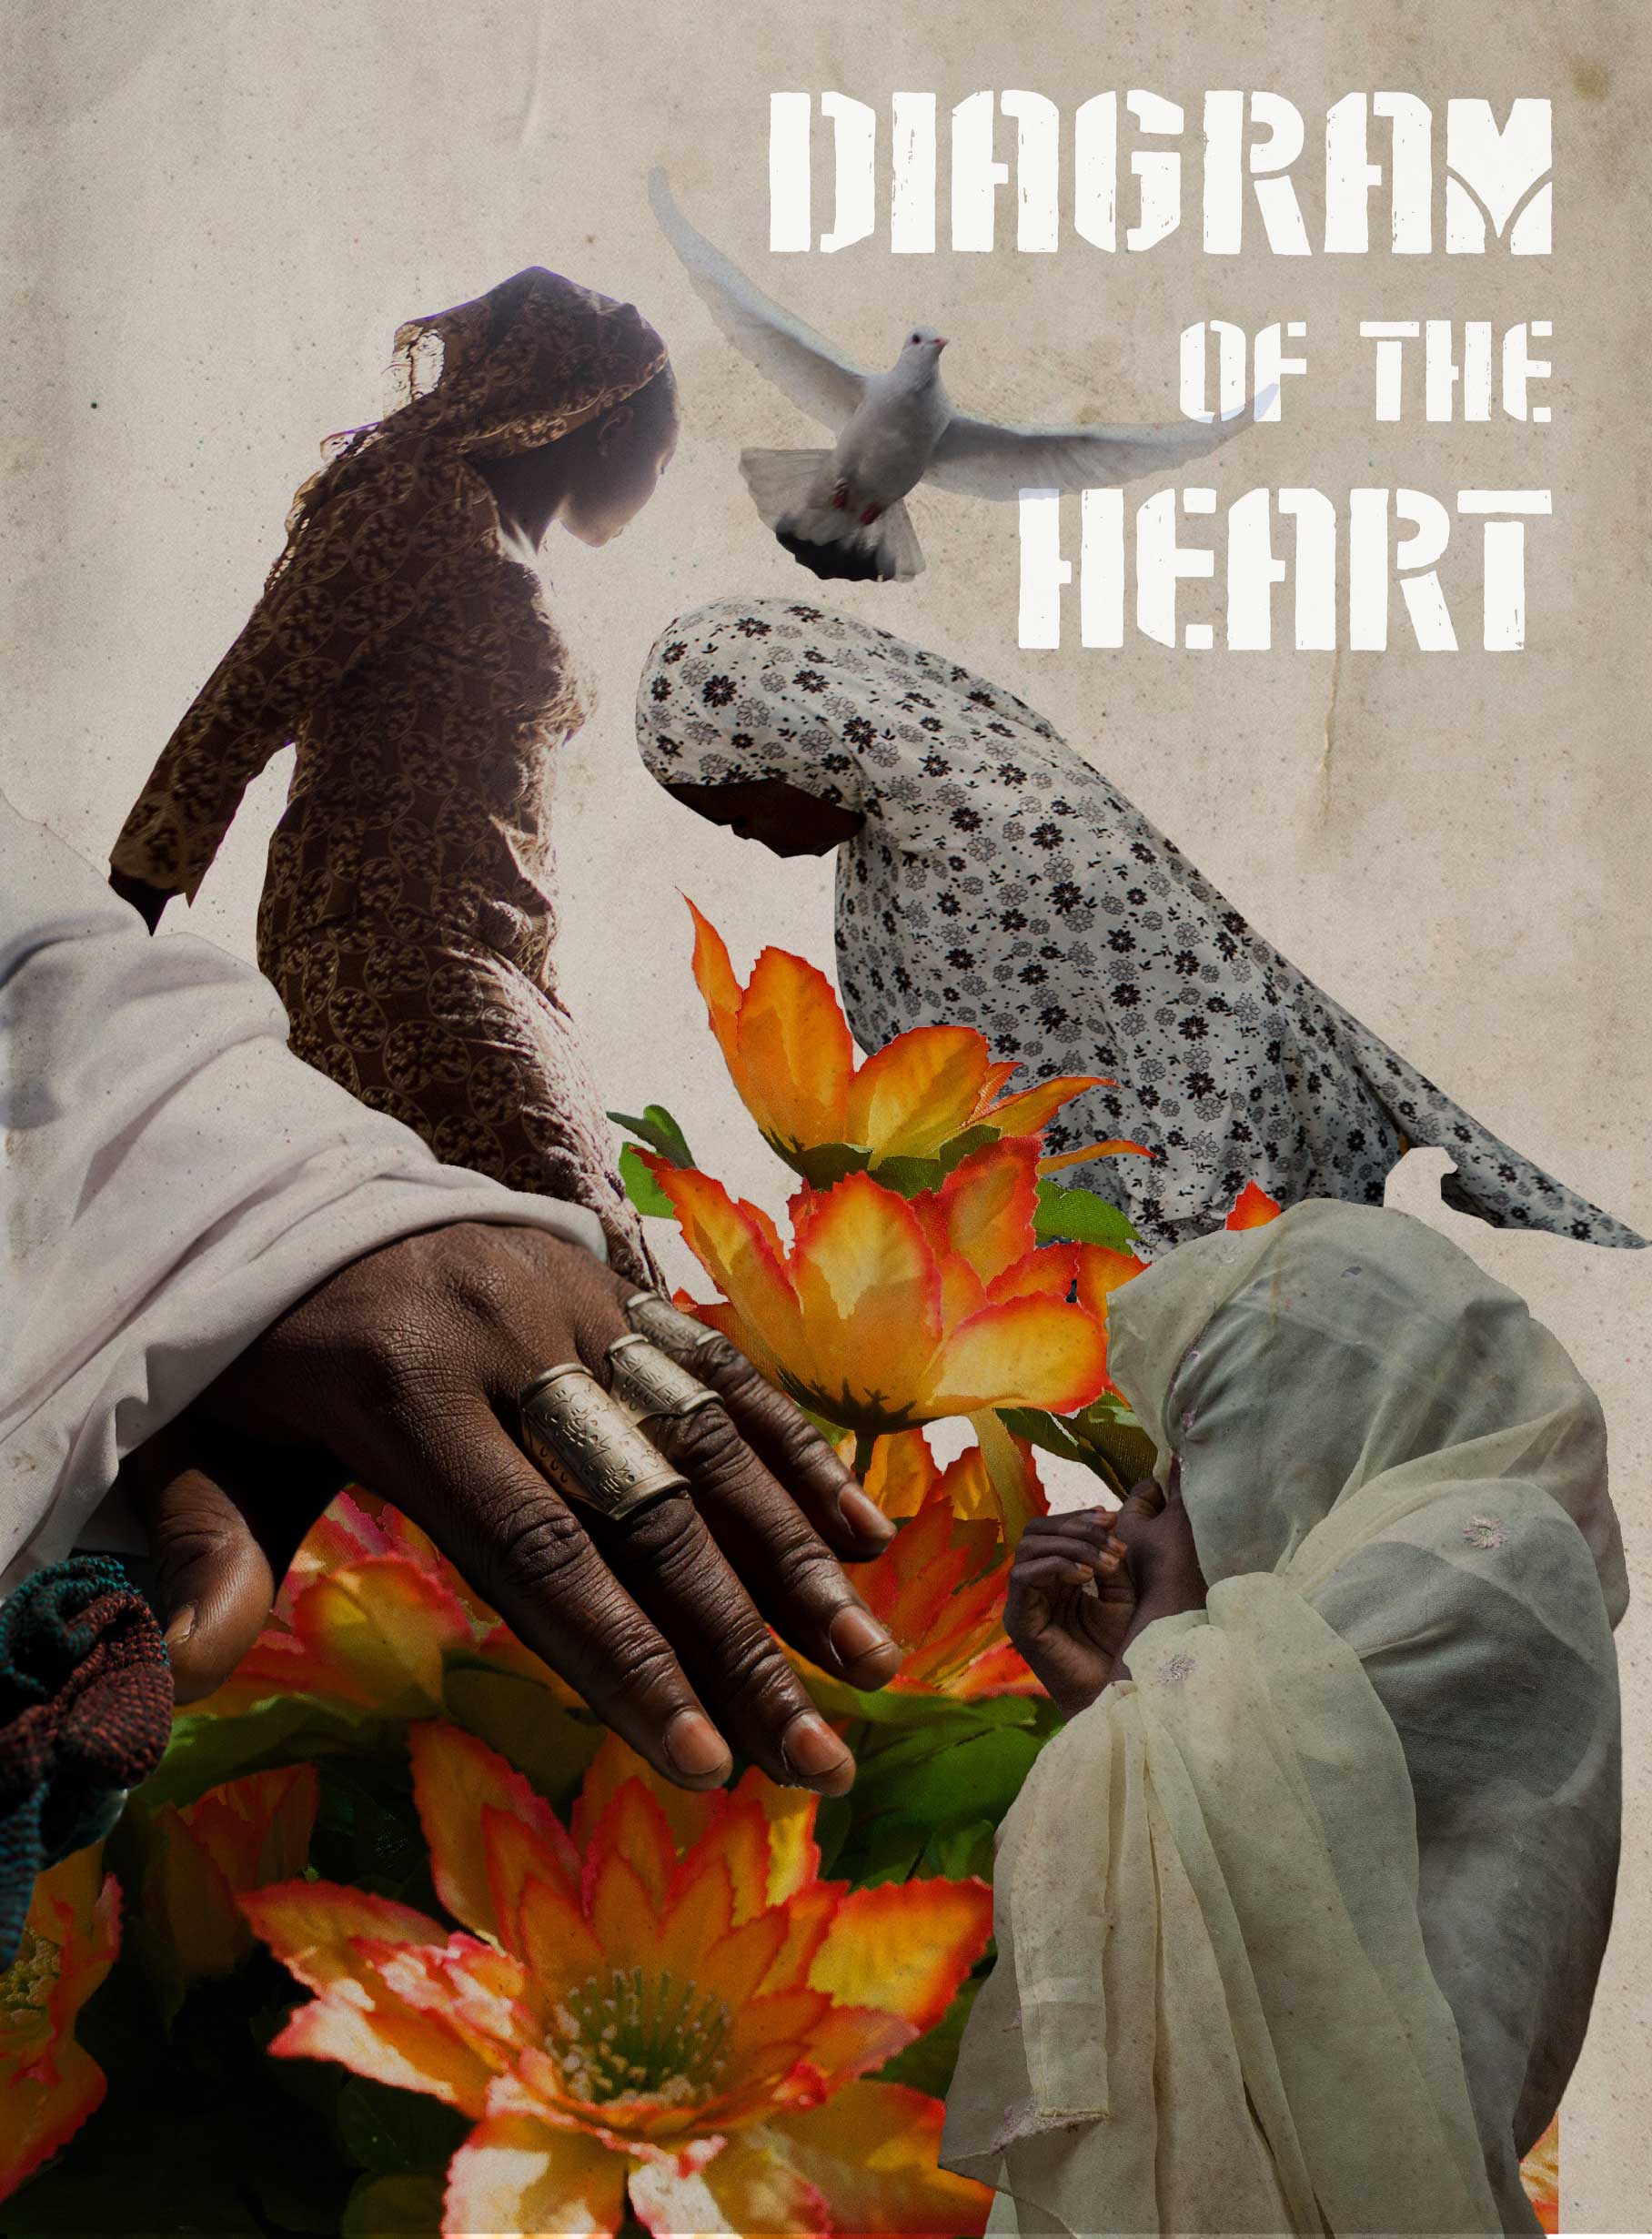 'Diagram of the Heart', by Glenna Gordon, will be released as a photo book on Feb. 11, 2016, published by Red Hook Editions.